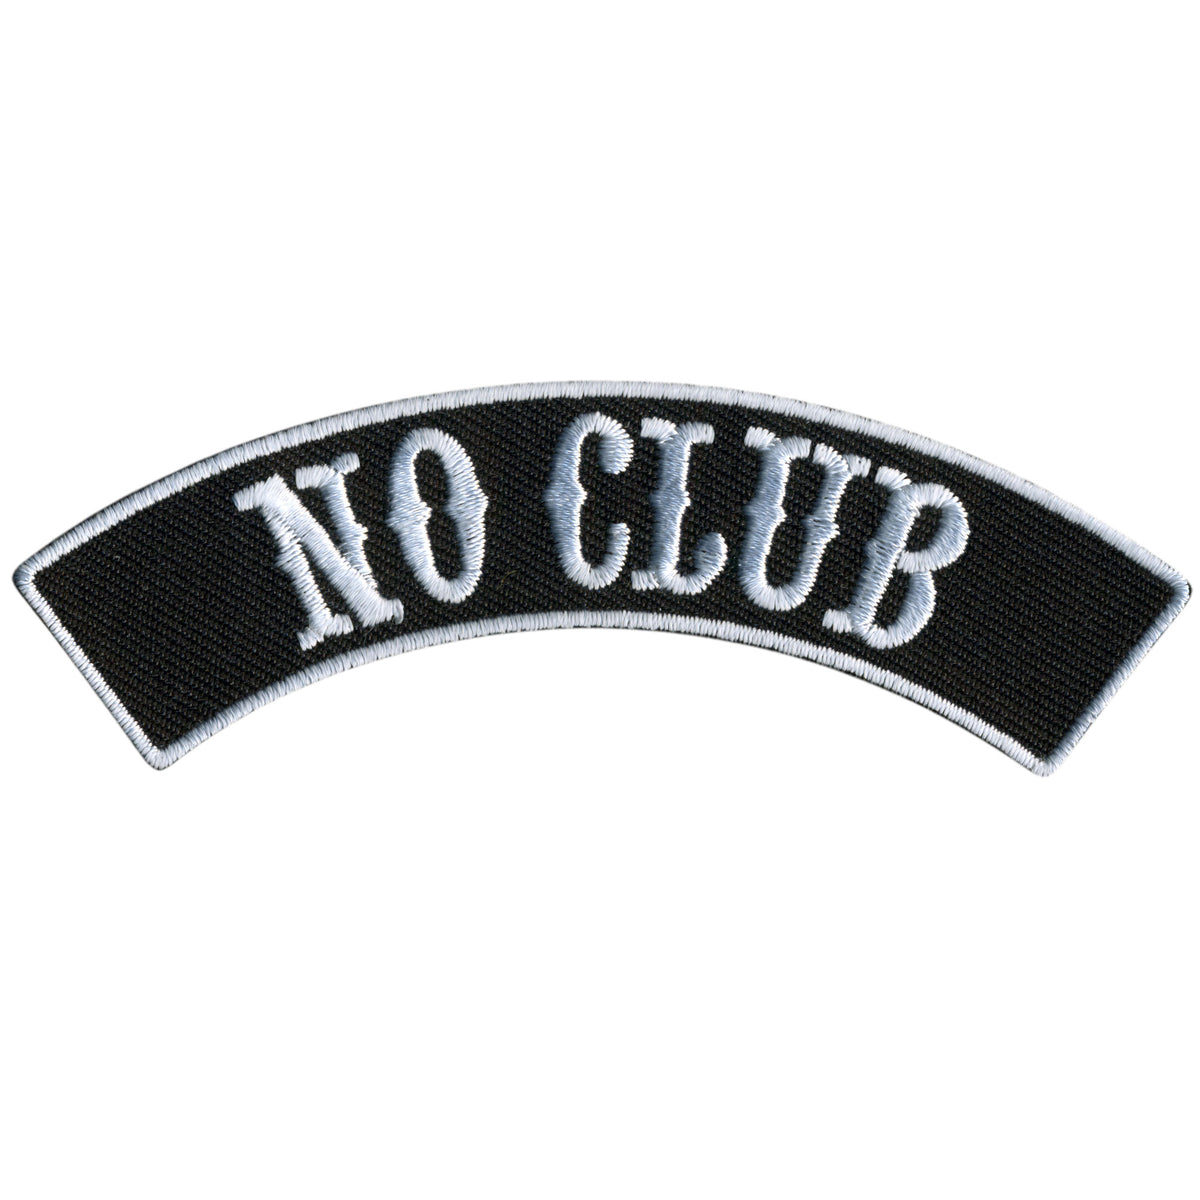 Hot Leathers No Club 4” X 1” Top Rocker Patch